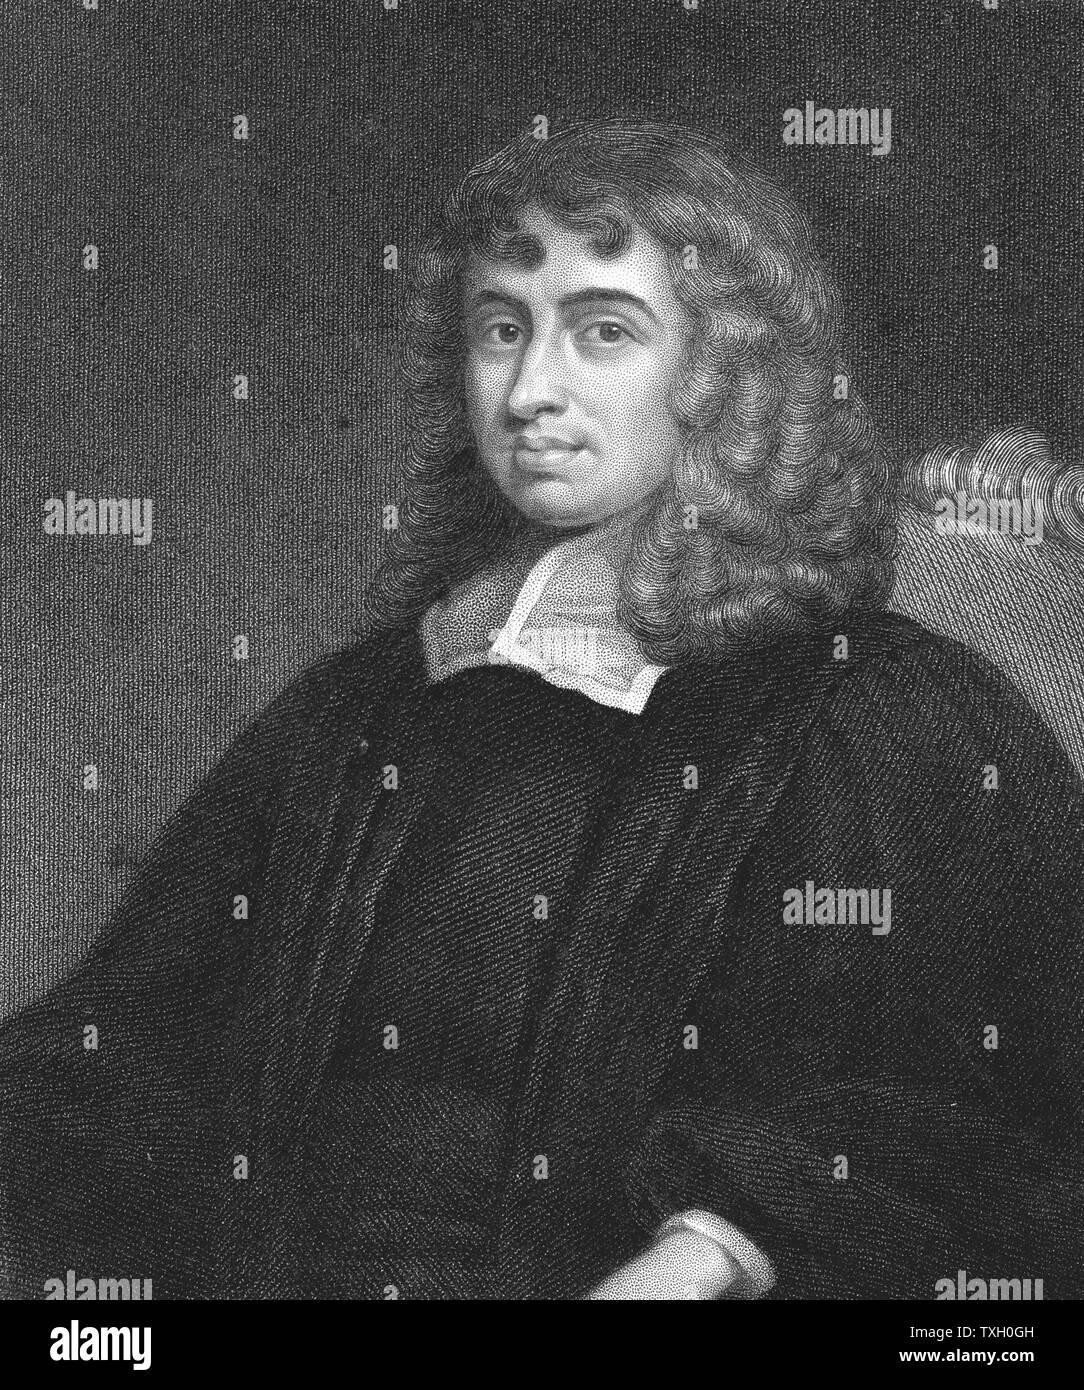 Isaac Barrow (1630-1677) English mathematician and cleric. Lucasian professor of mathematics at Cambridge 1663, resigned 1669 to make way for Isaac Newton. Master of Trinity College, Cambridge, and founder of its library. Engraving after portrait Stock Photo